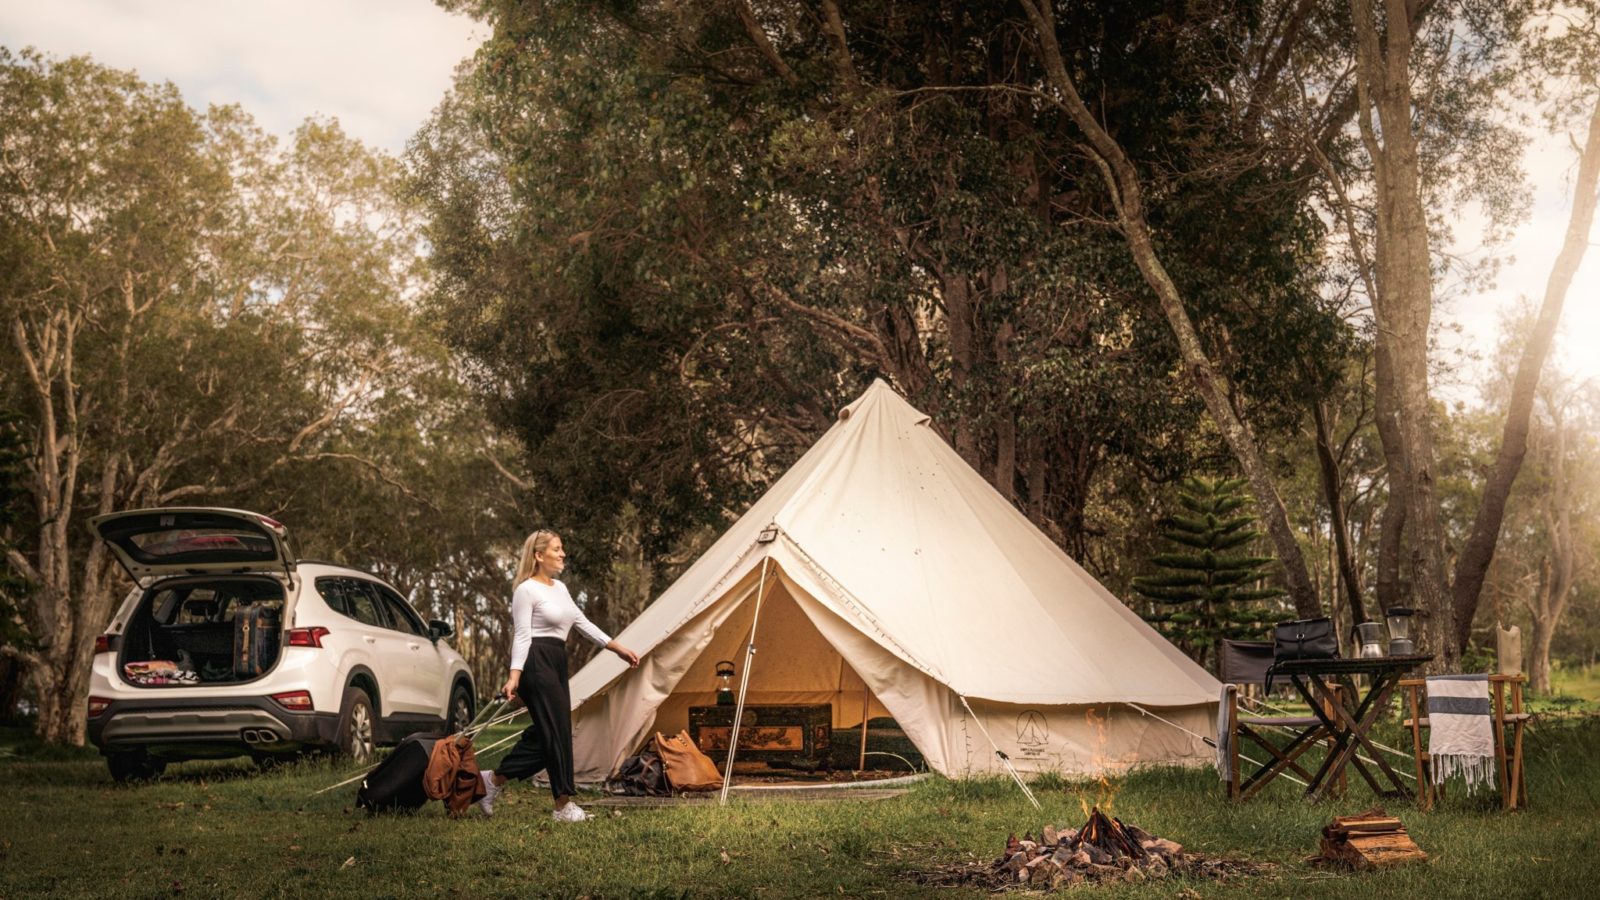 Simple Pleasures Co glamping tent Rob Mulally